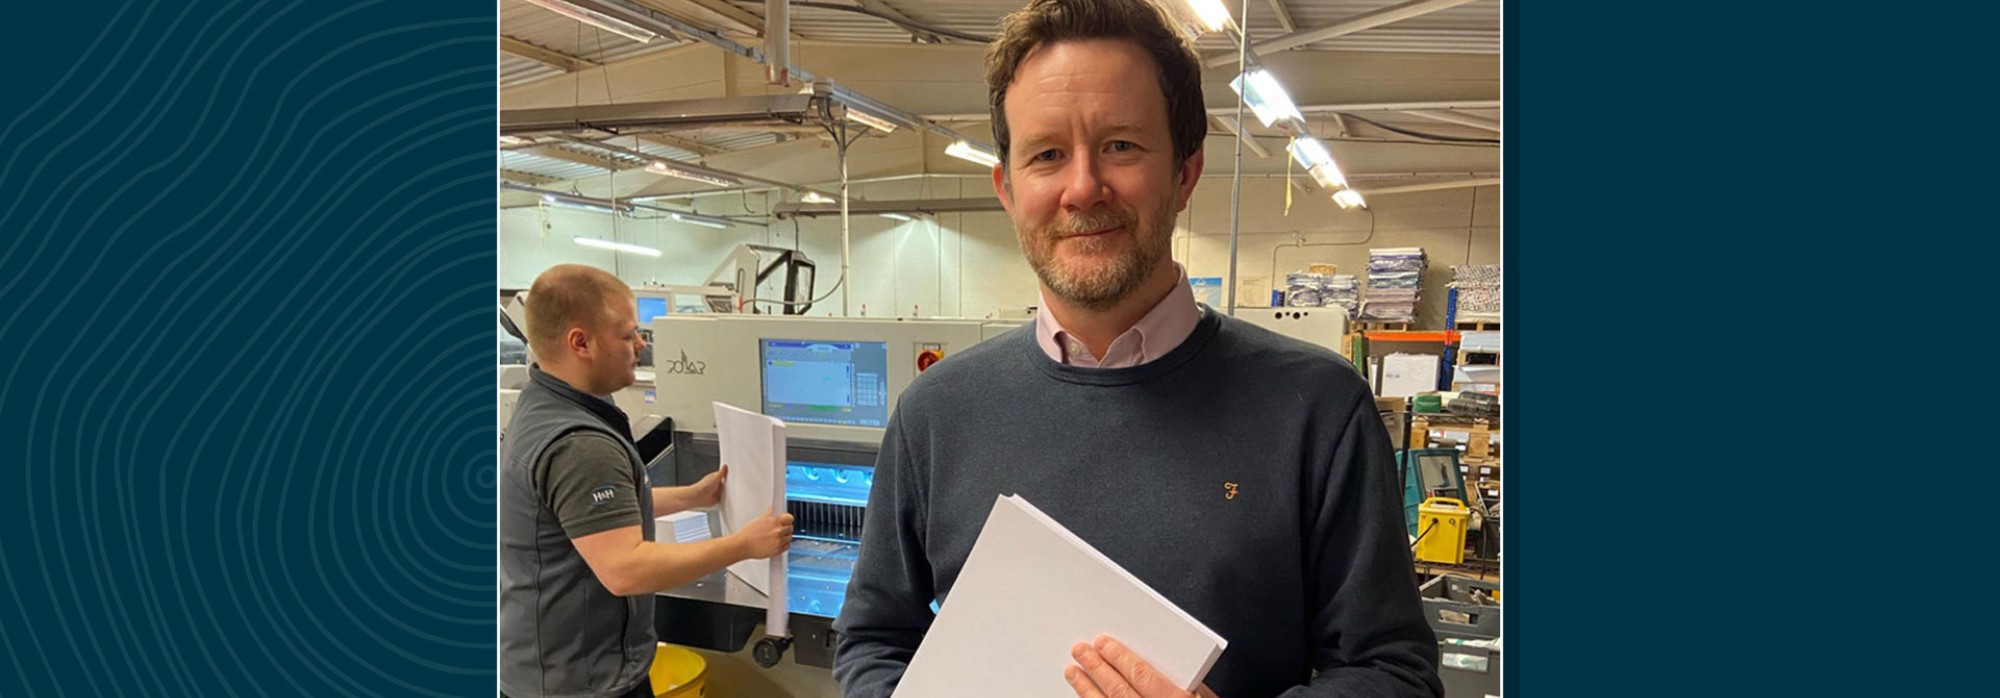 H&H Reeds has announced a new partnership with paper manufacturer James Cropper (pictured) to directly supply Cumbrian businesses with paper products with in-built antiviral protection.